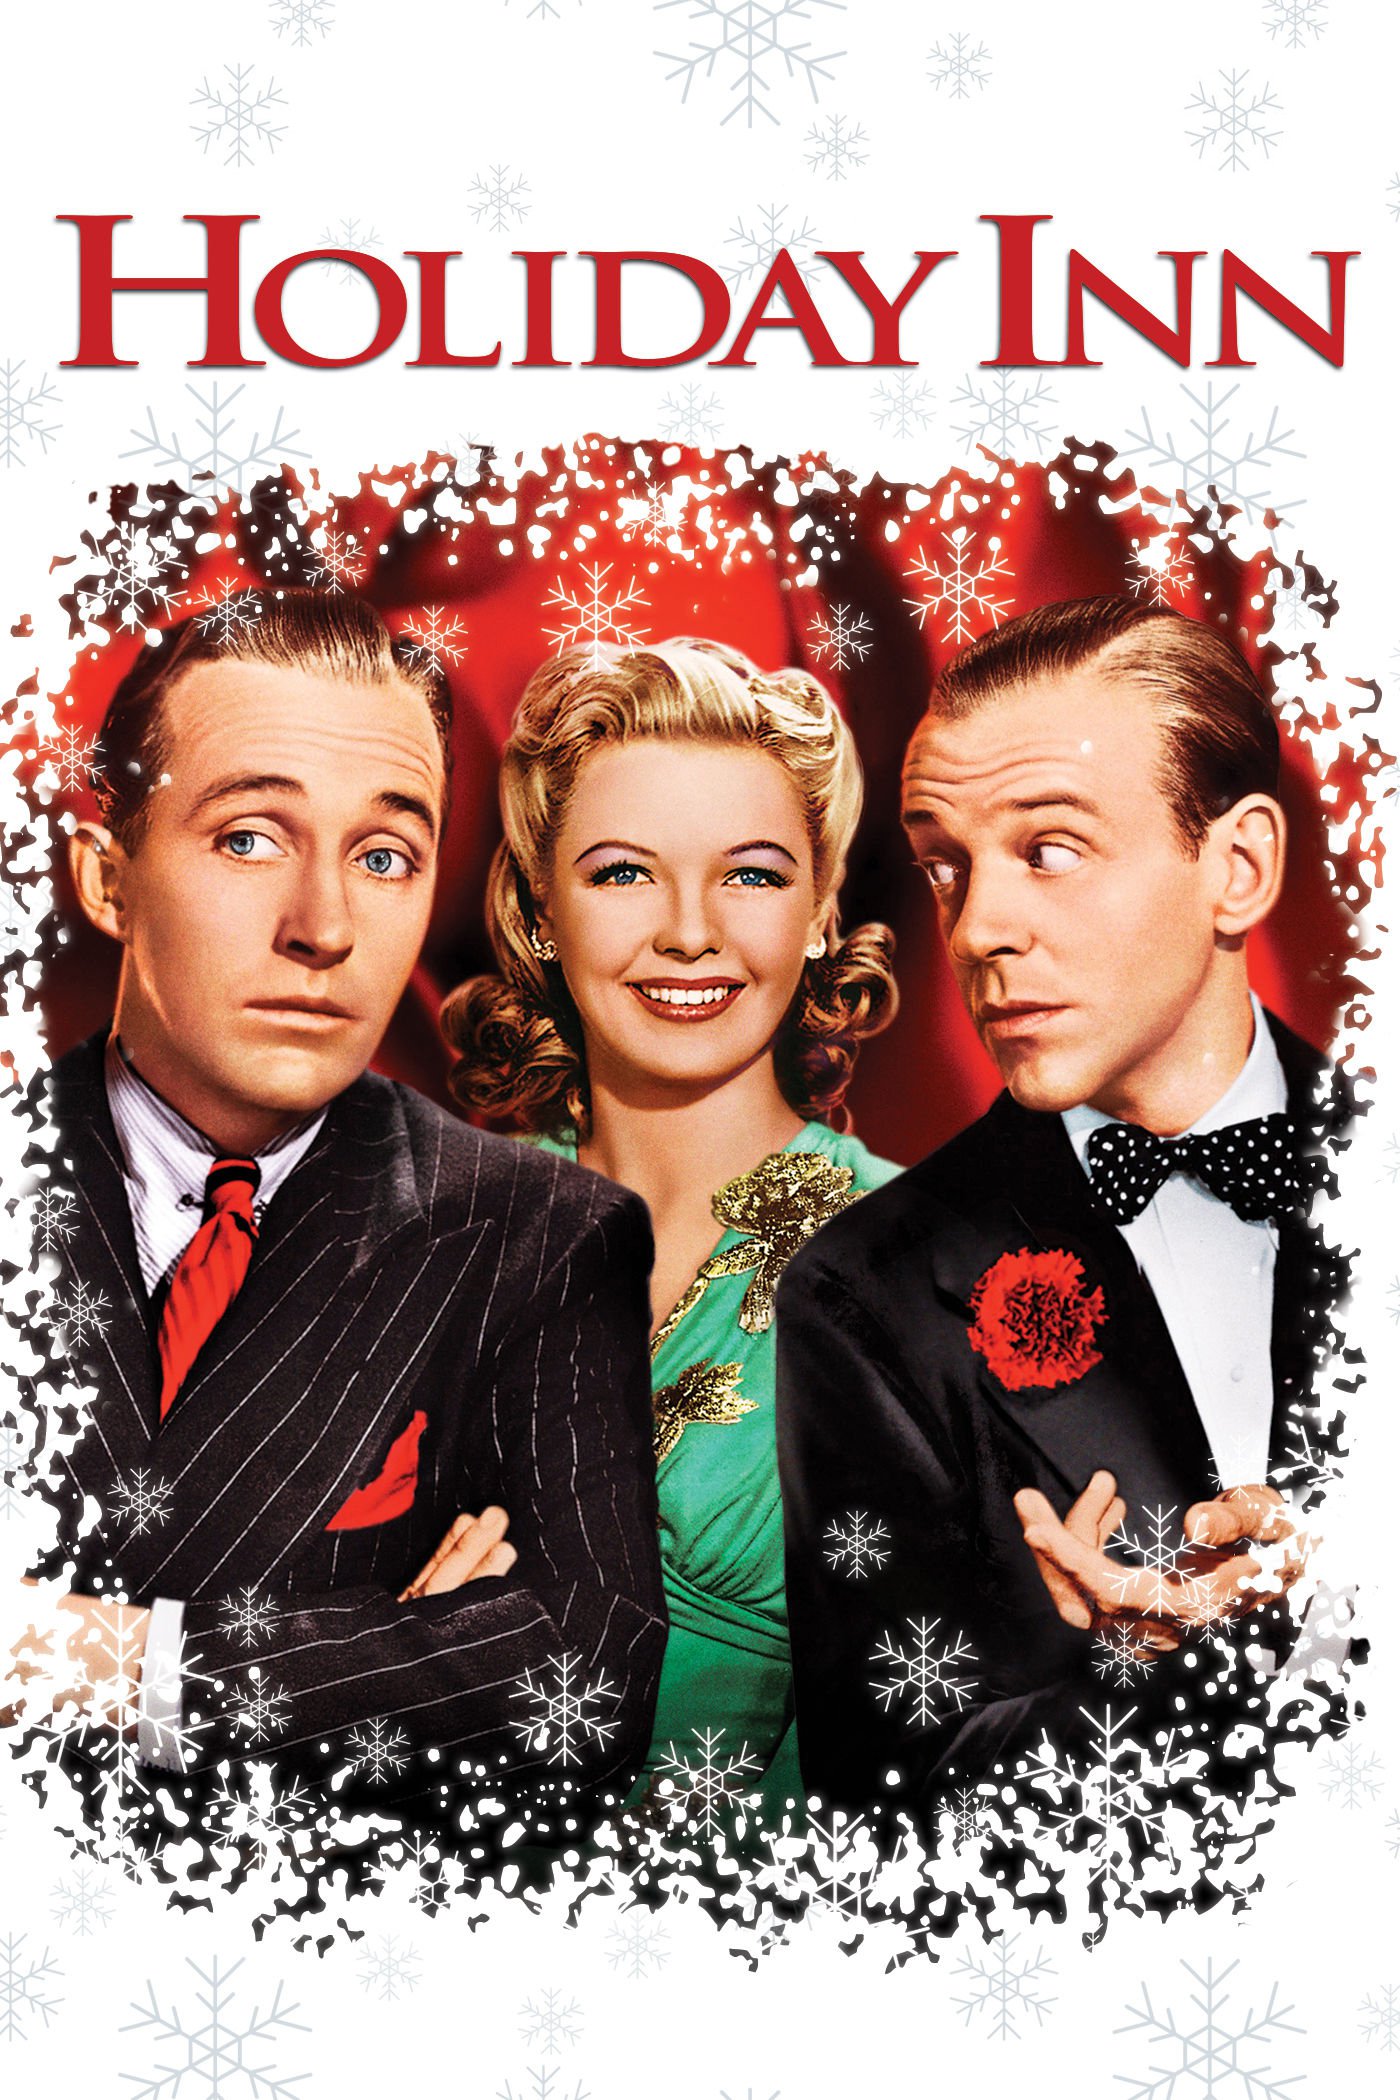 Poster for the movie "Holiday Inn"